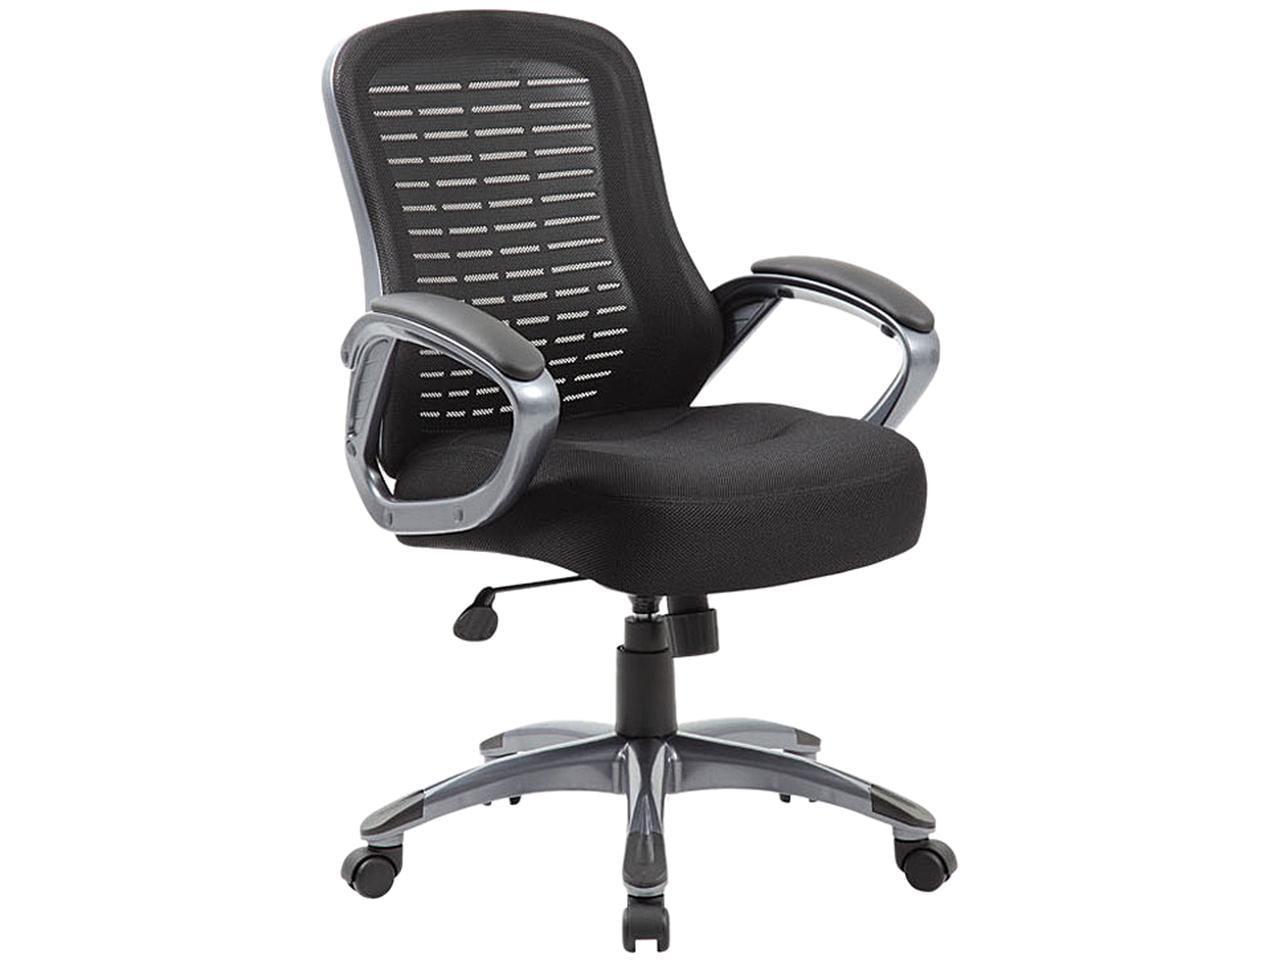 ErgoComfort High Back Swivel Task Chair with Mesh & Leather Accents